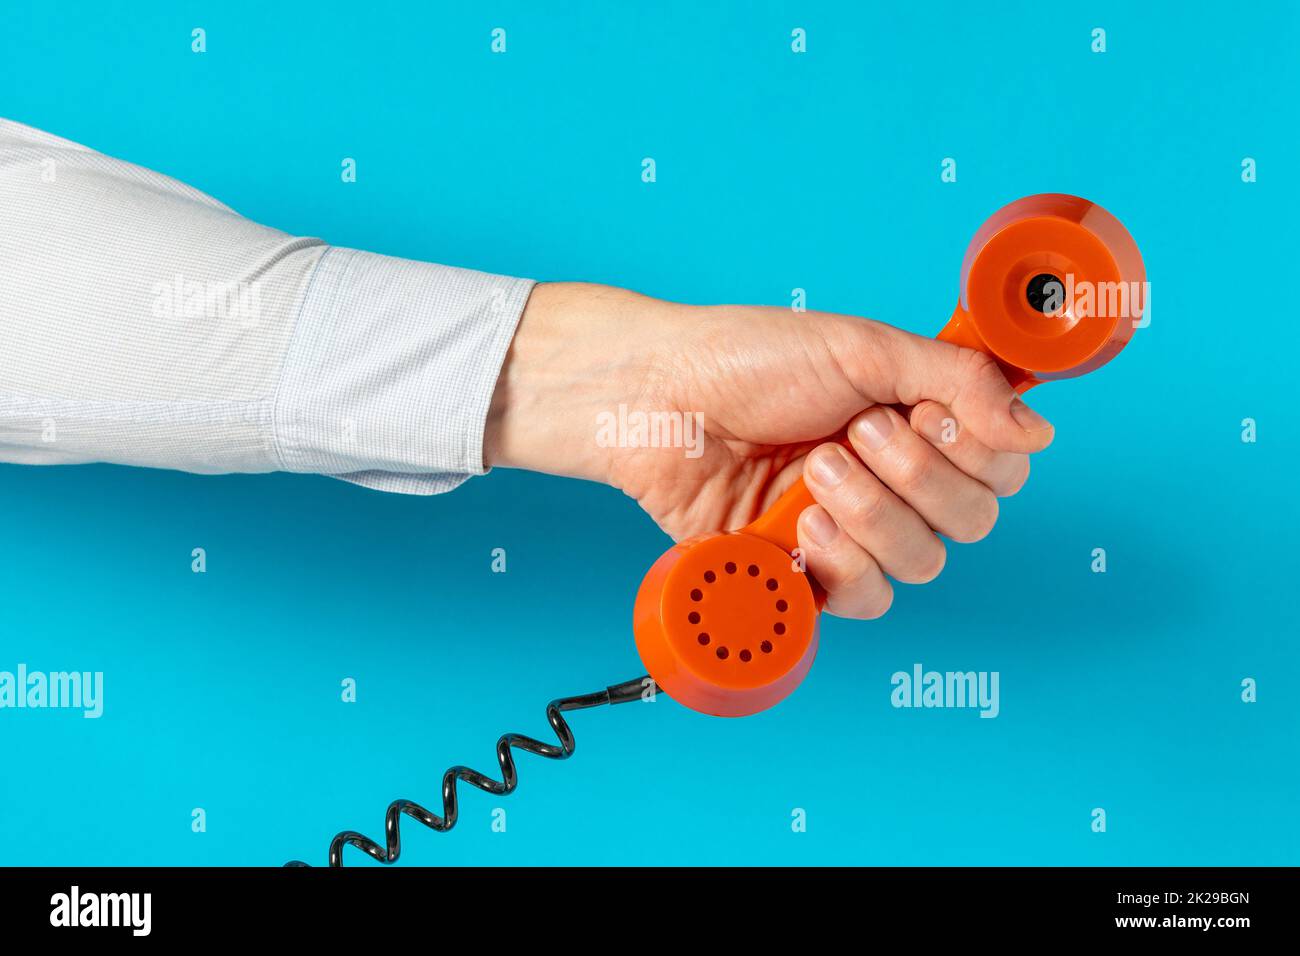 Old telephone receiver in hand over blue background Stock Photo